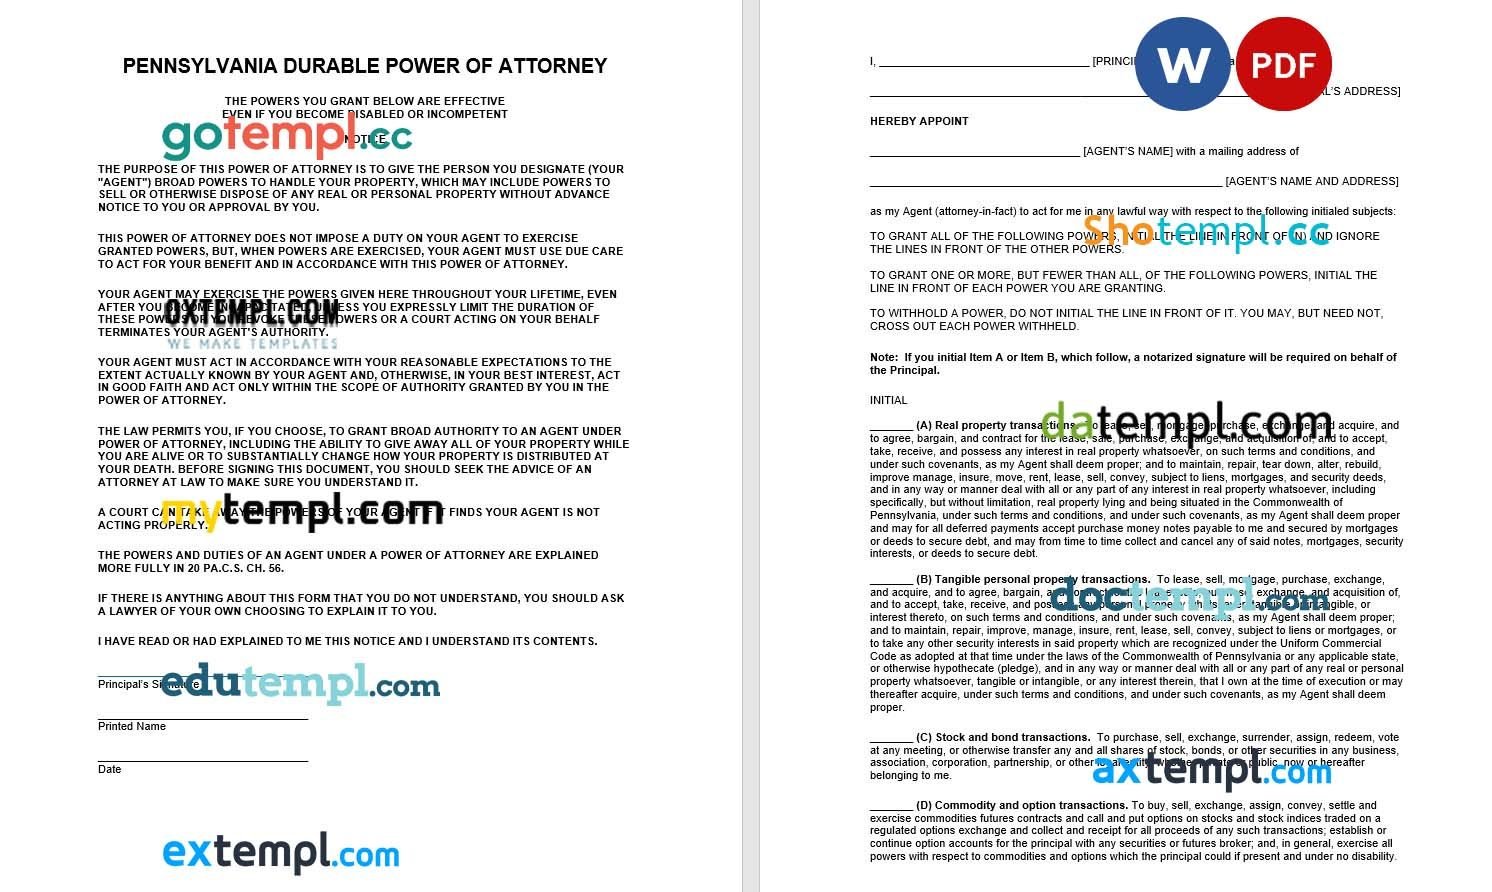 Limited Power of Attorney Form example, fully editable